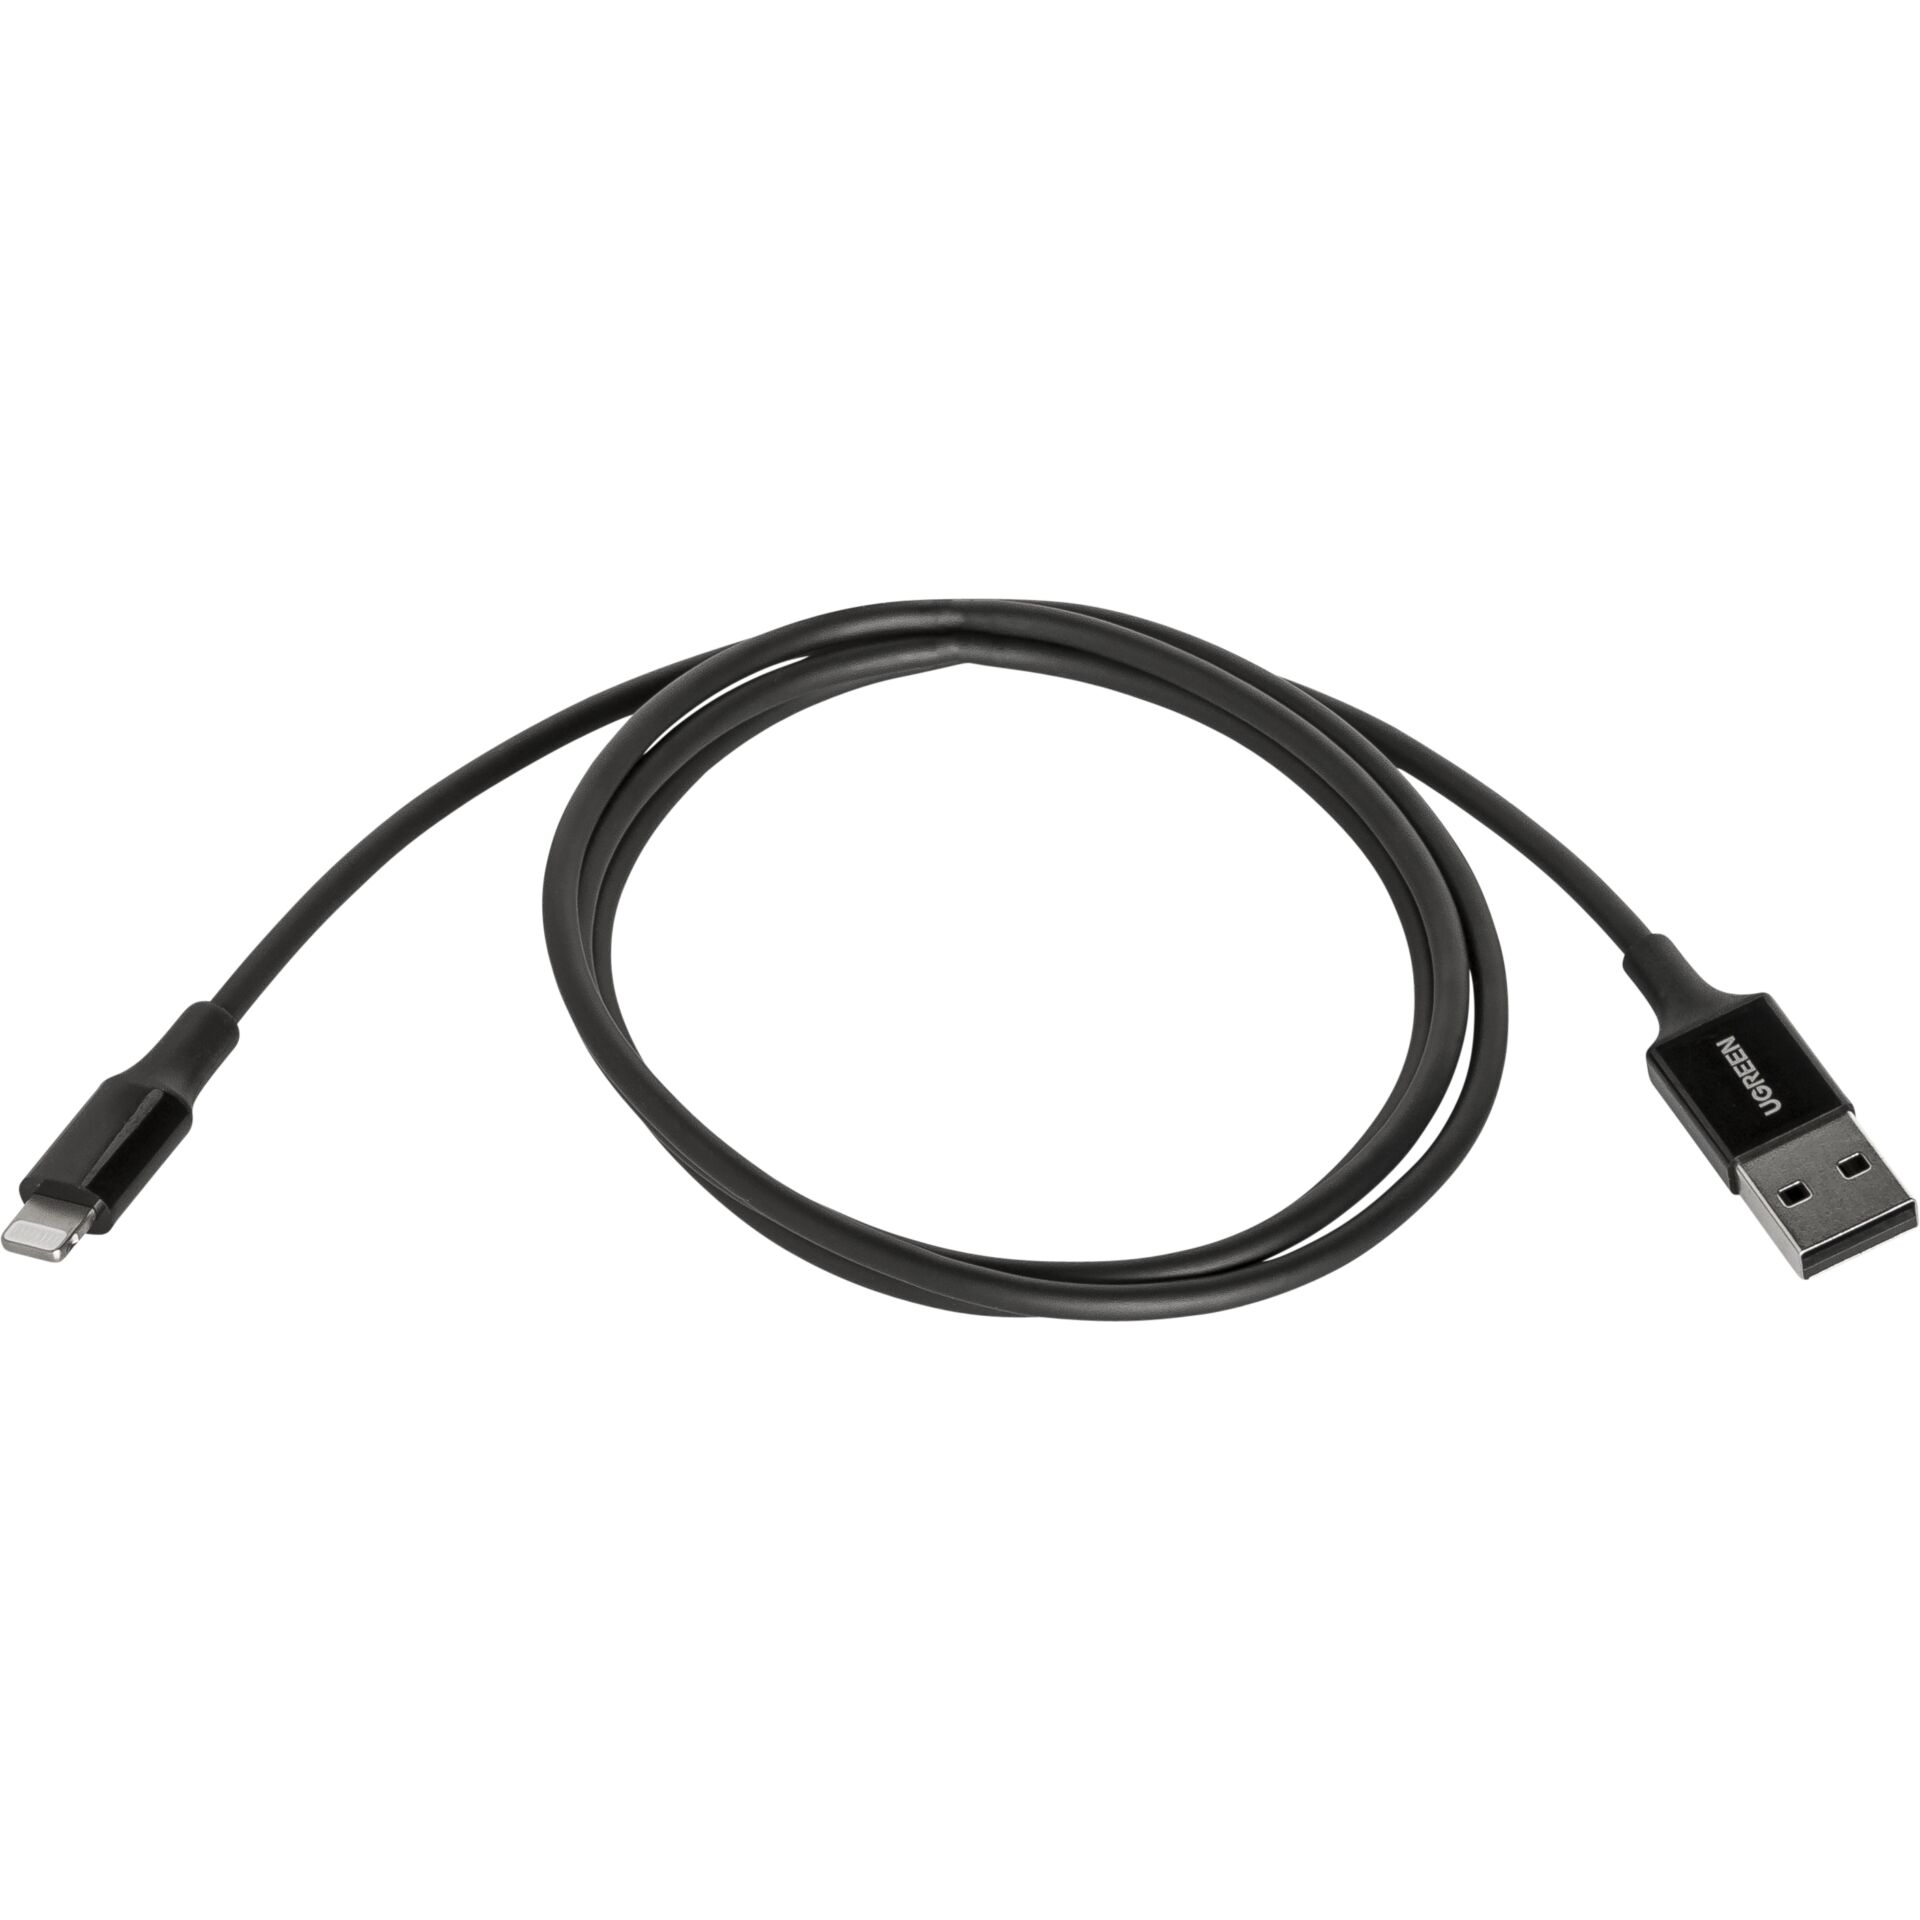 UGREEN Lightning To USB-A Cable